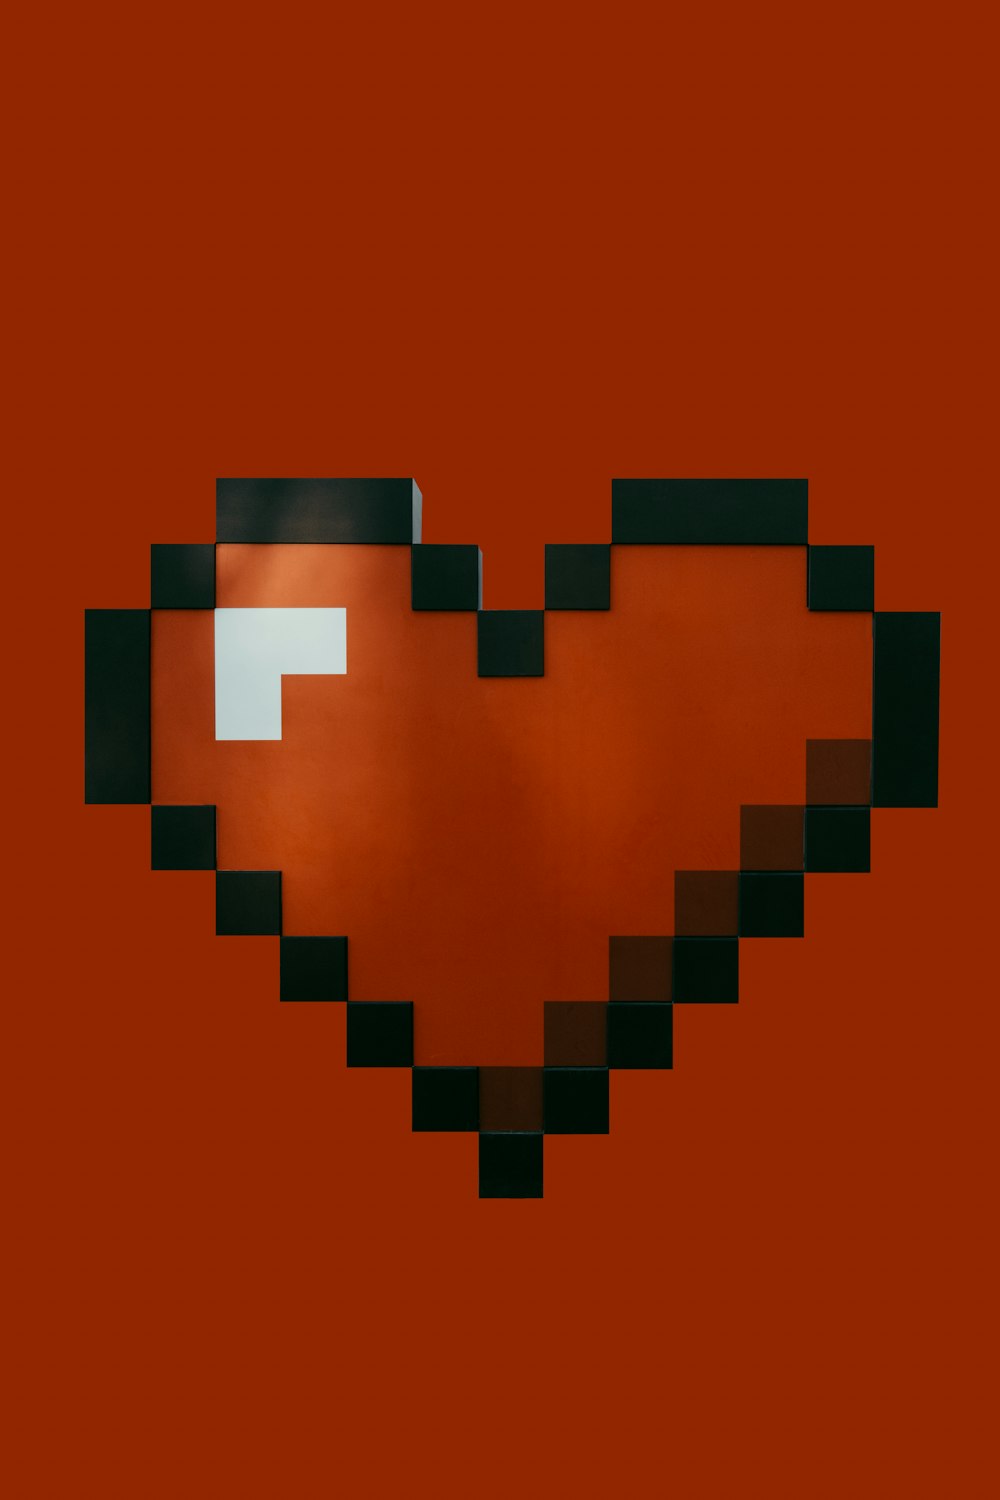 a heart shaped object with a red background